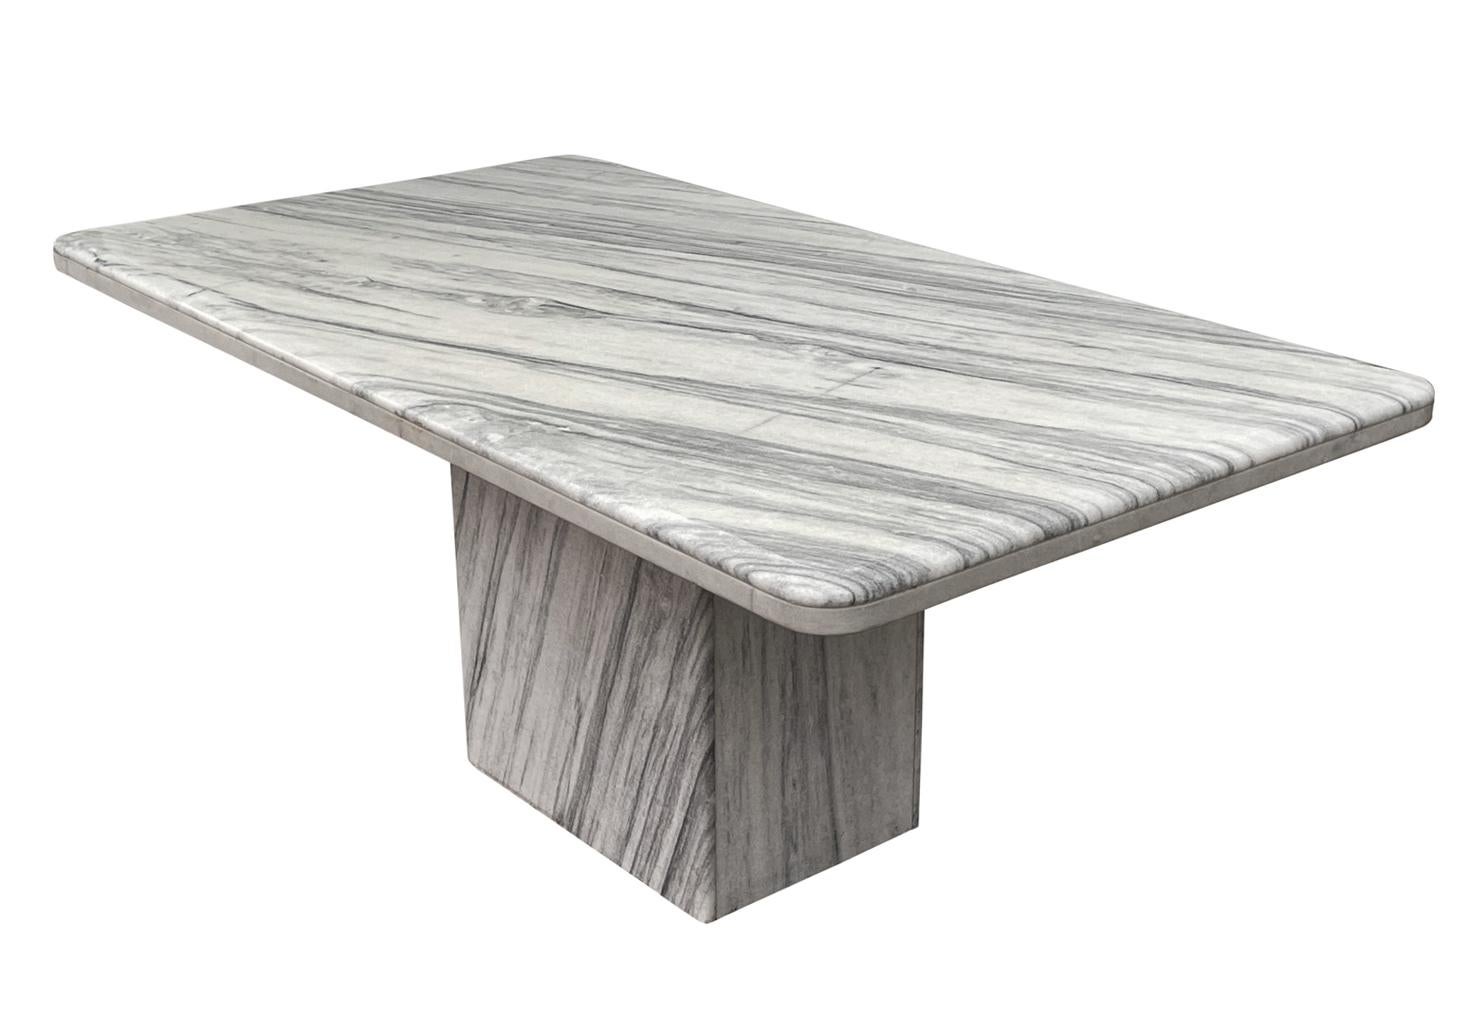 Late 20th Century Mid Century Italian Post Modern Rectangular Marble Dining Table in White & Gray